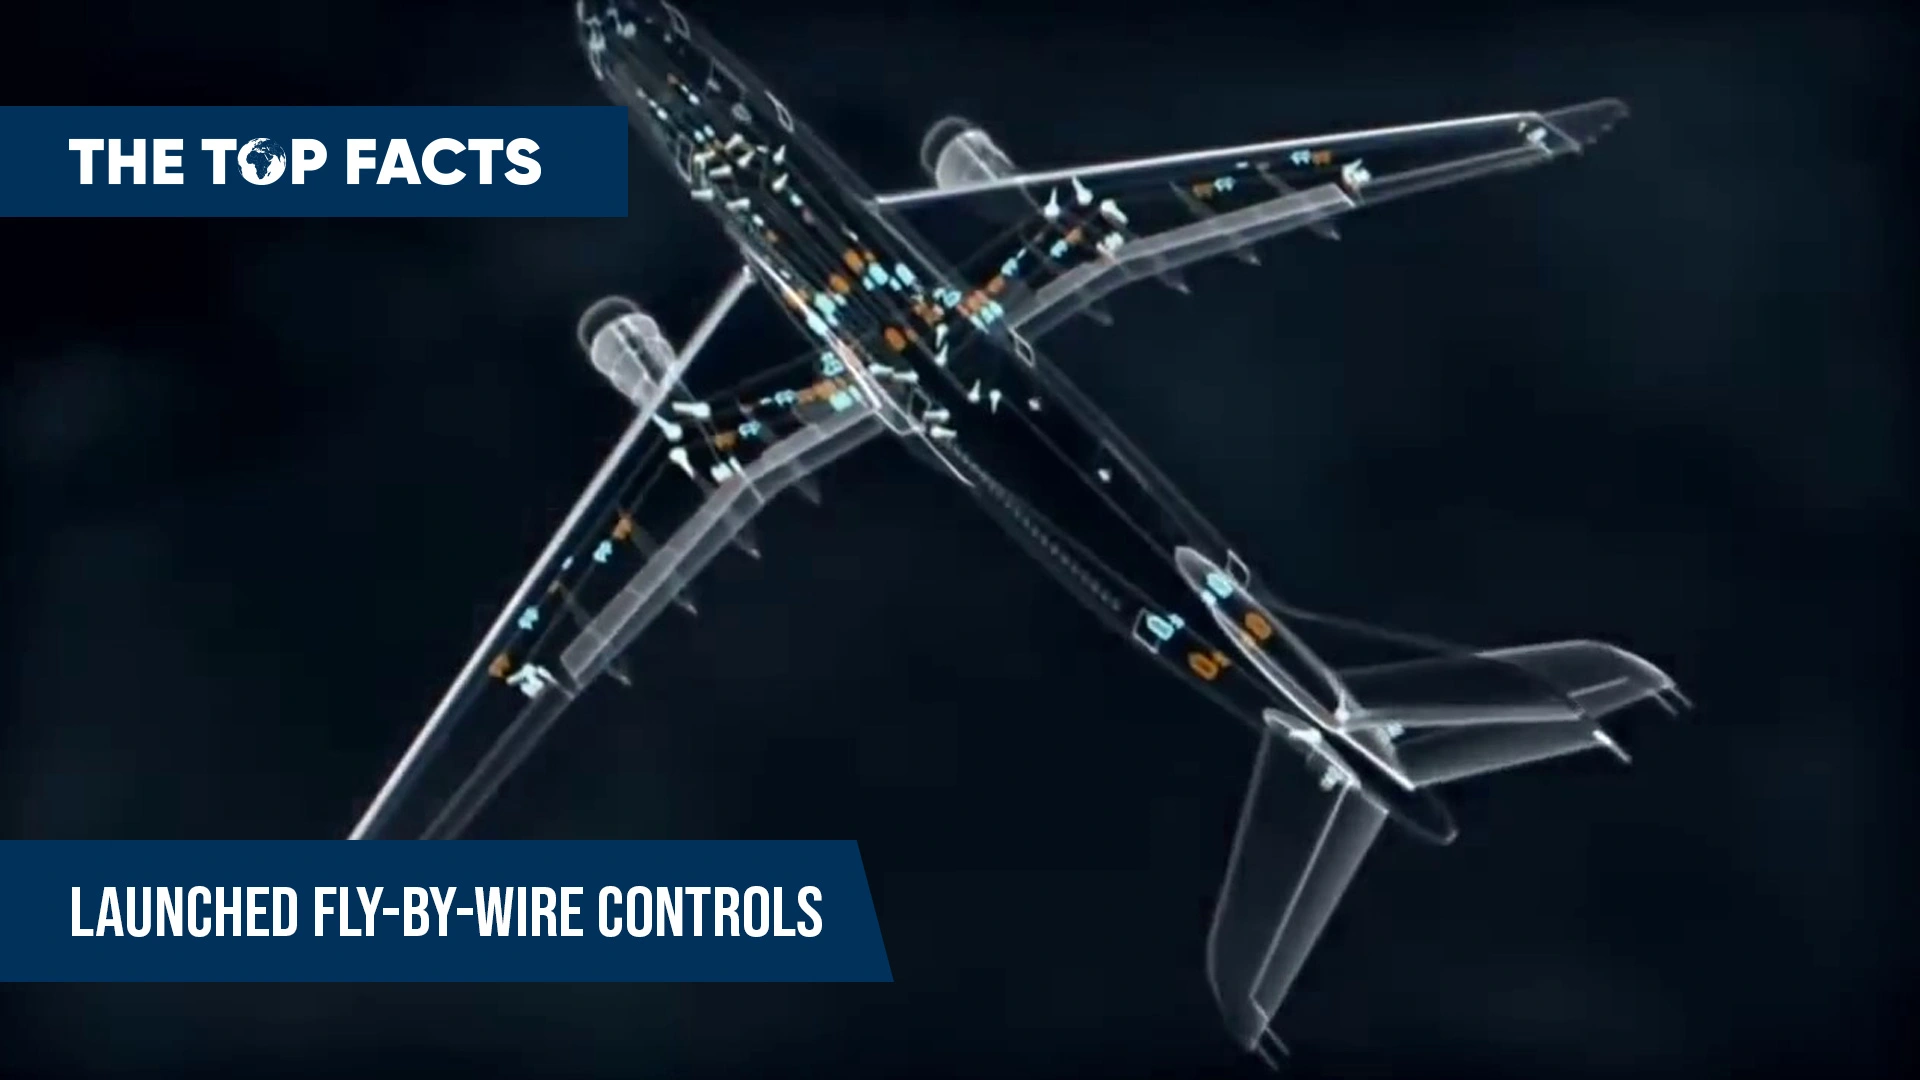 The Airbus A320 was the first commercial airplane to use fly-by-wire controls.